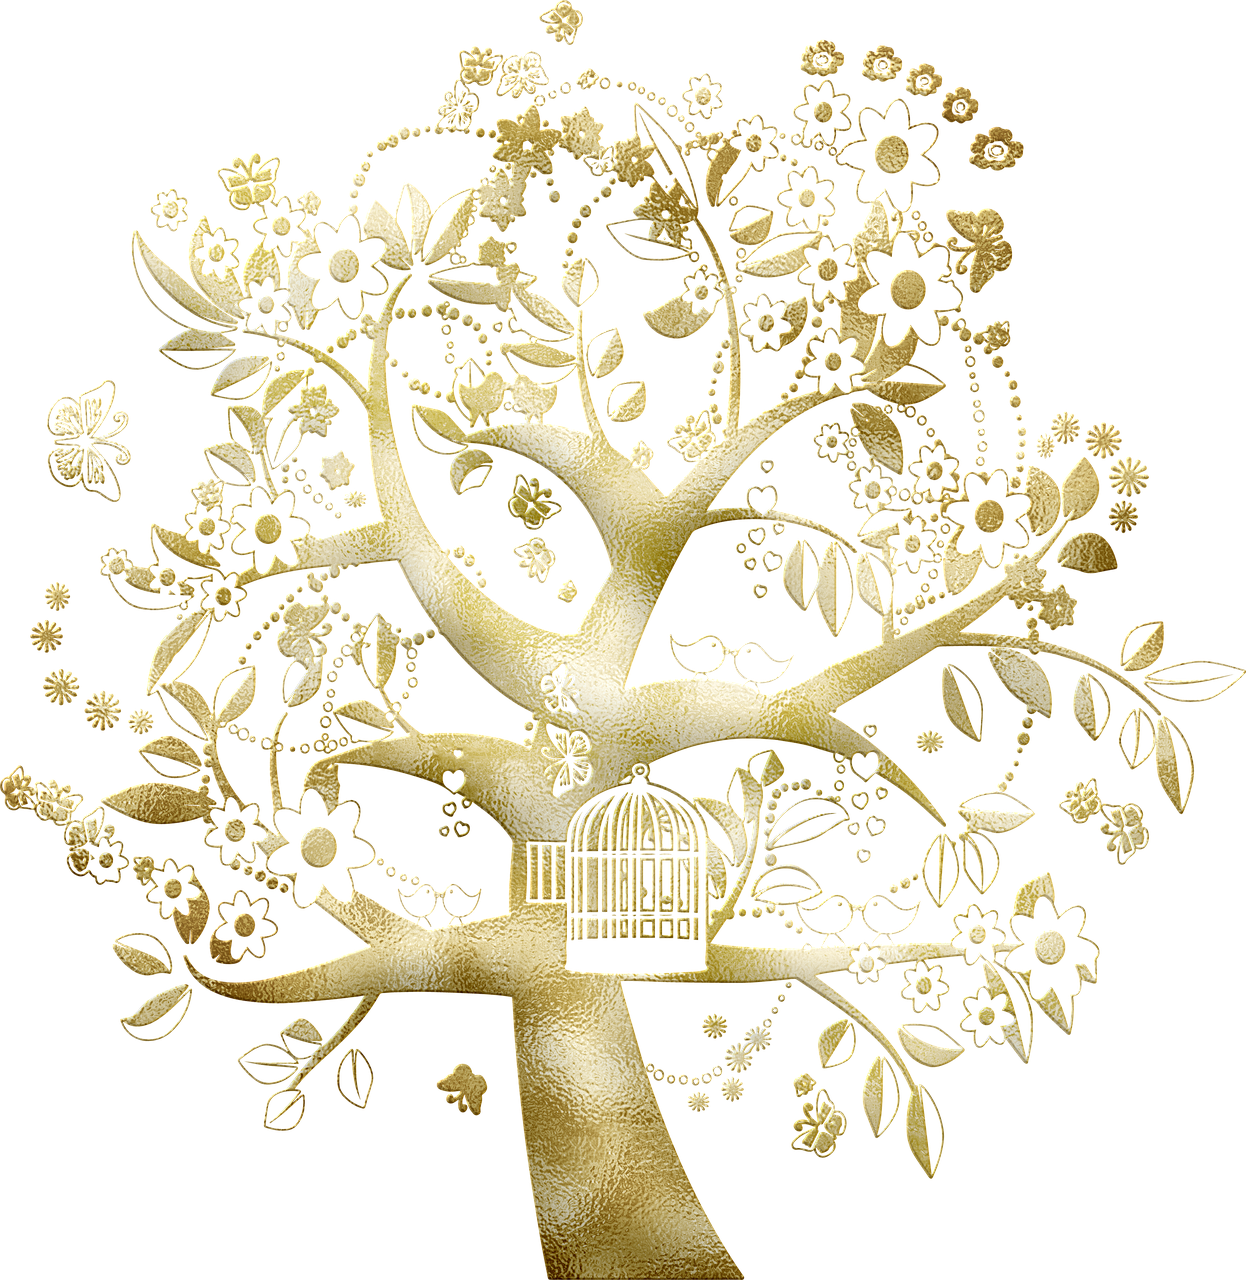 a golden tree with a bird cage in it, trending on pixabay, folk art, gilded. floral, golden lace pattern, gold ornate jewely, black white gold